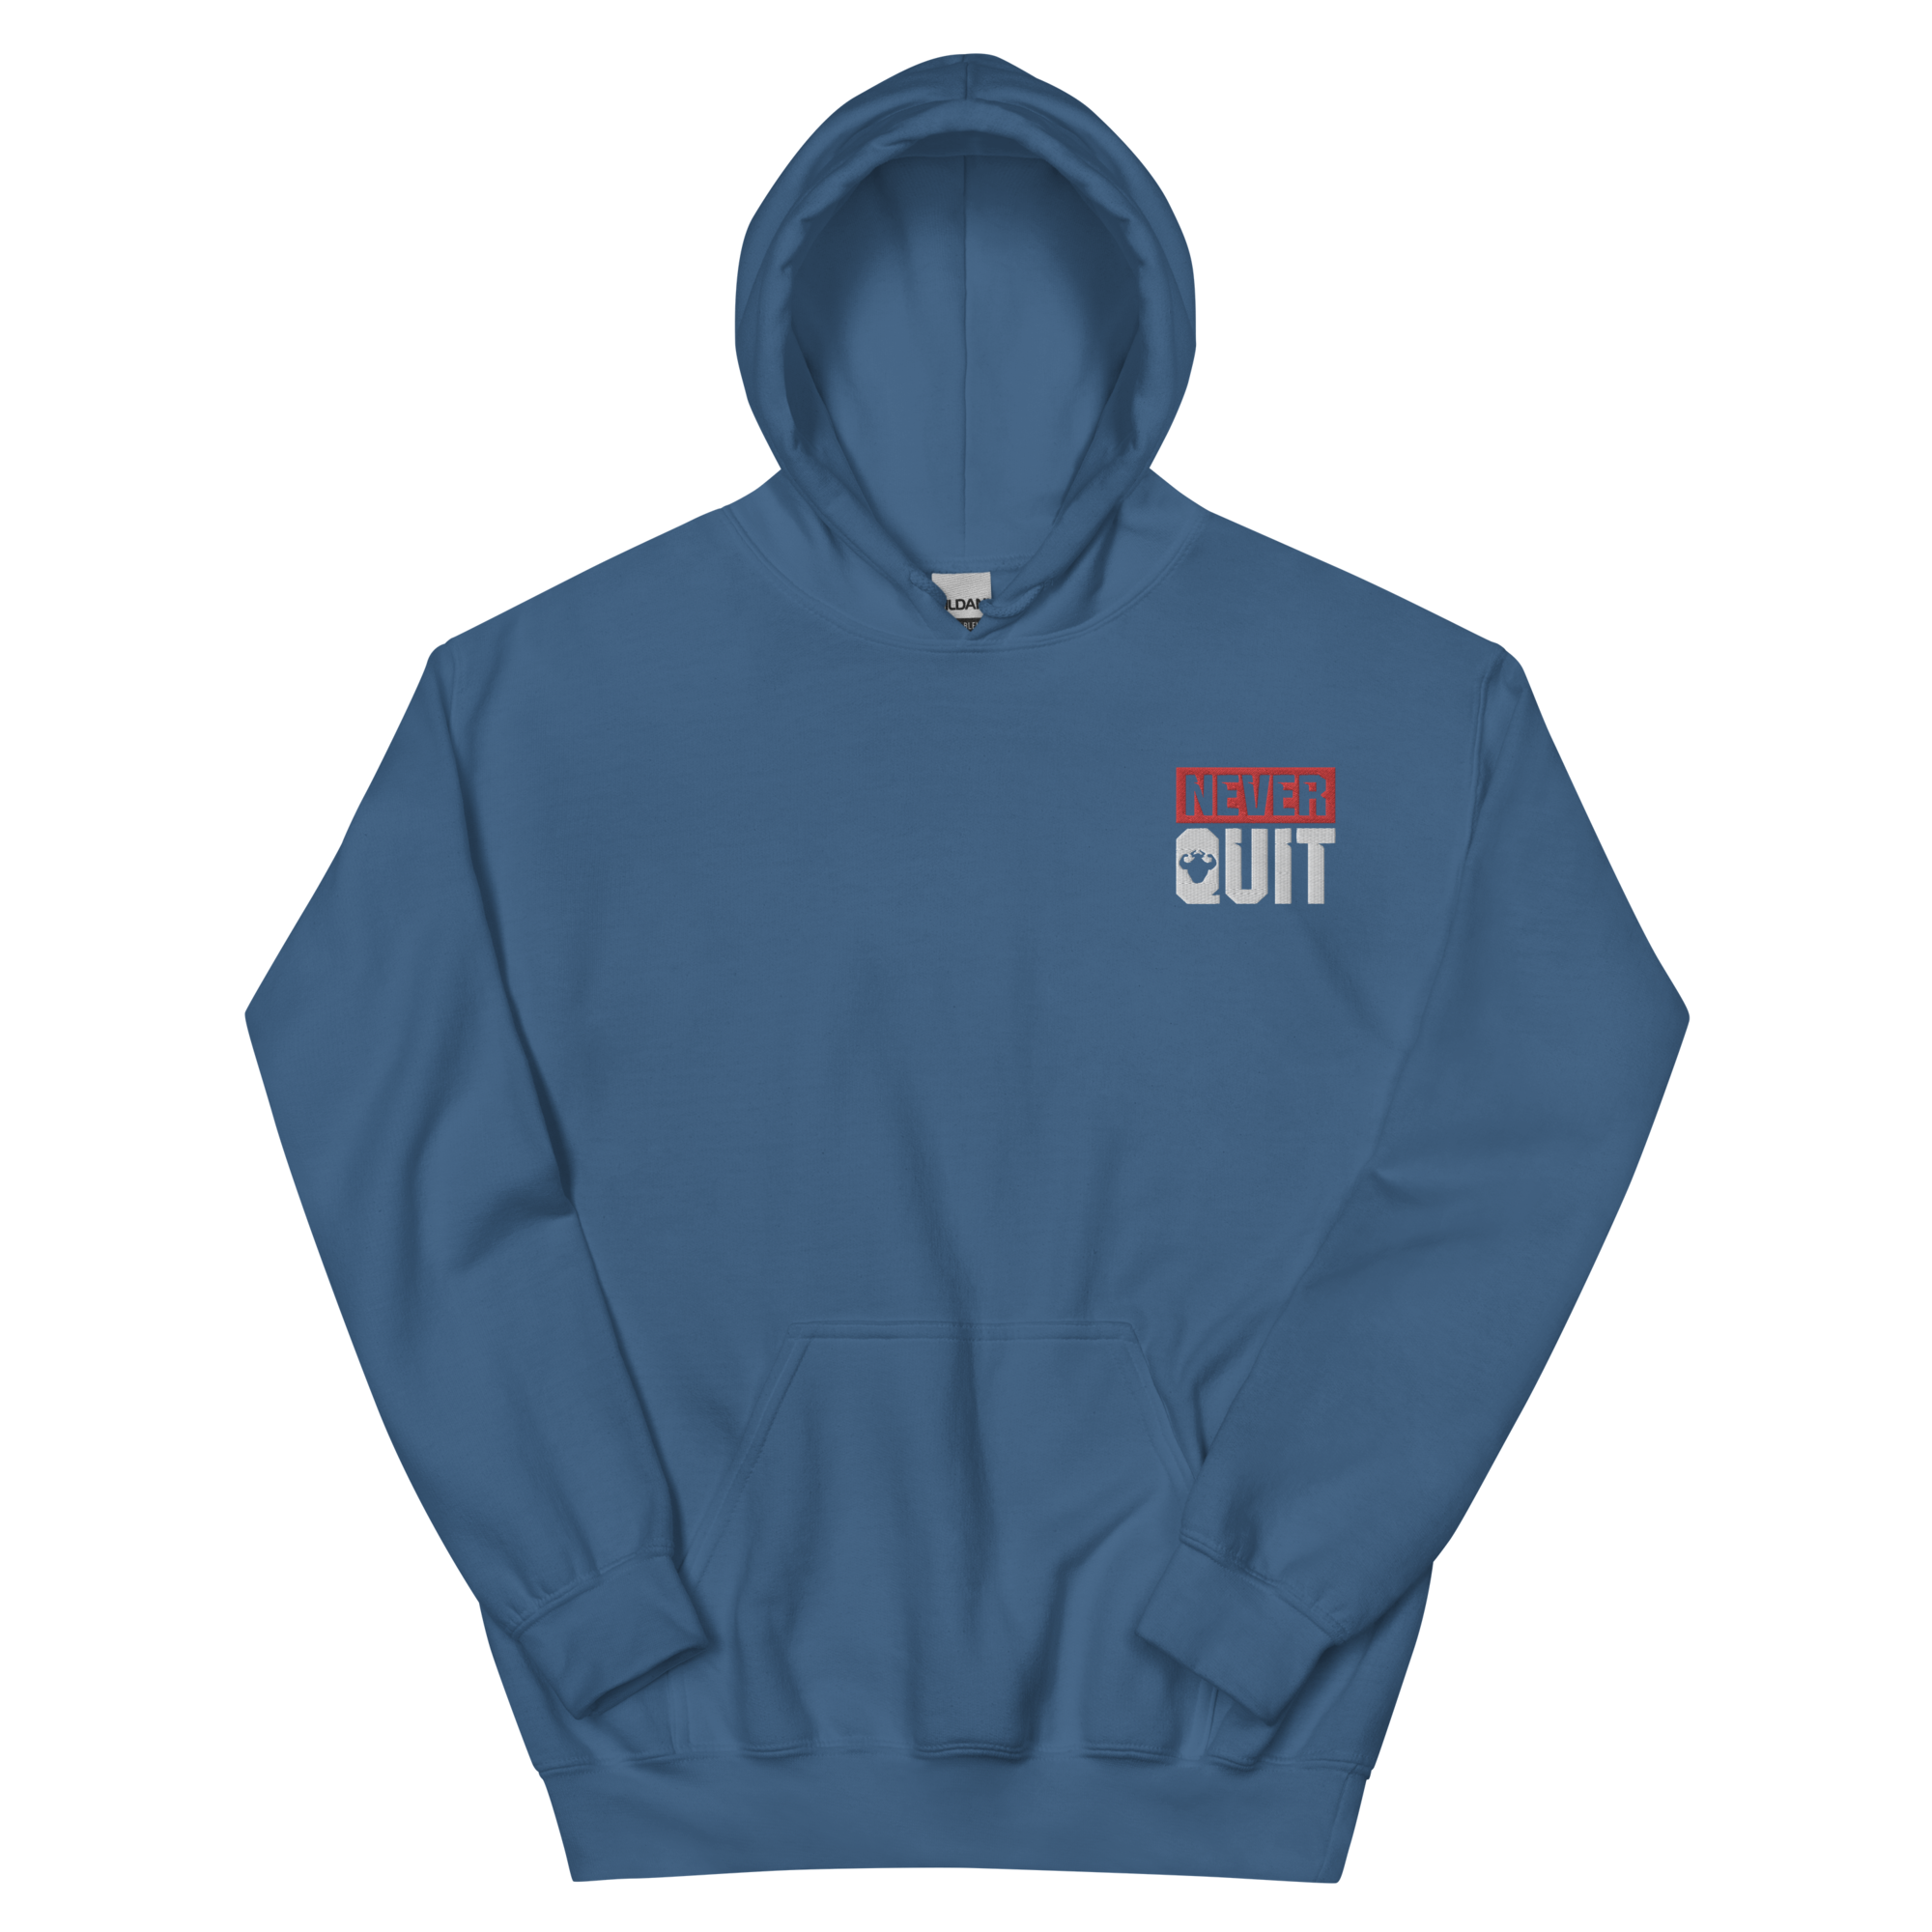 Never Quit Embroidered Logo Hoodie  - Strong and Humble Apparel